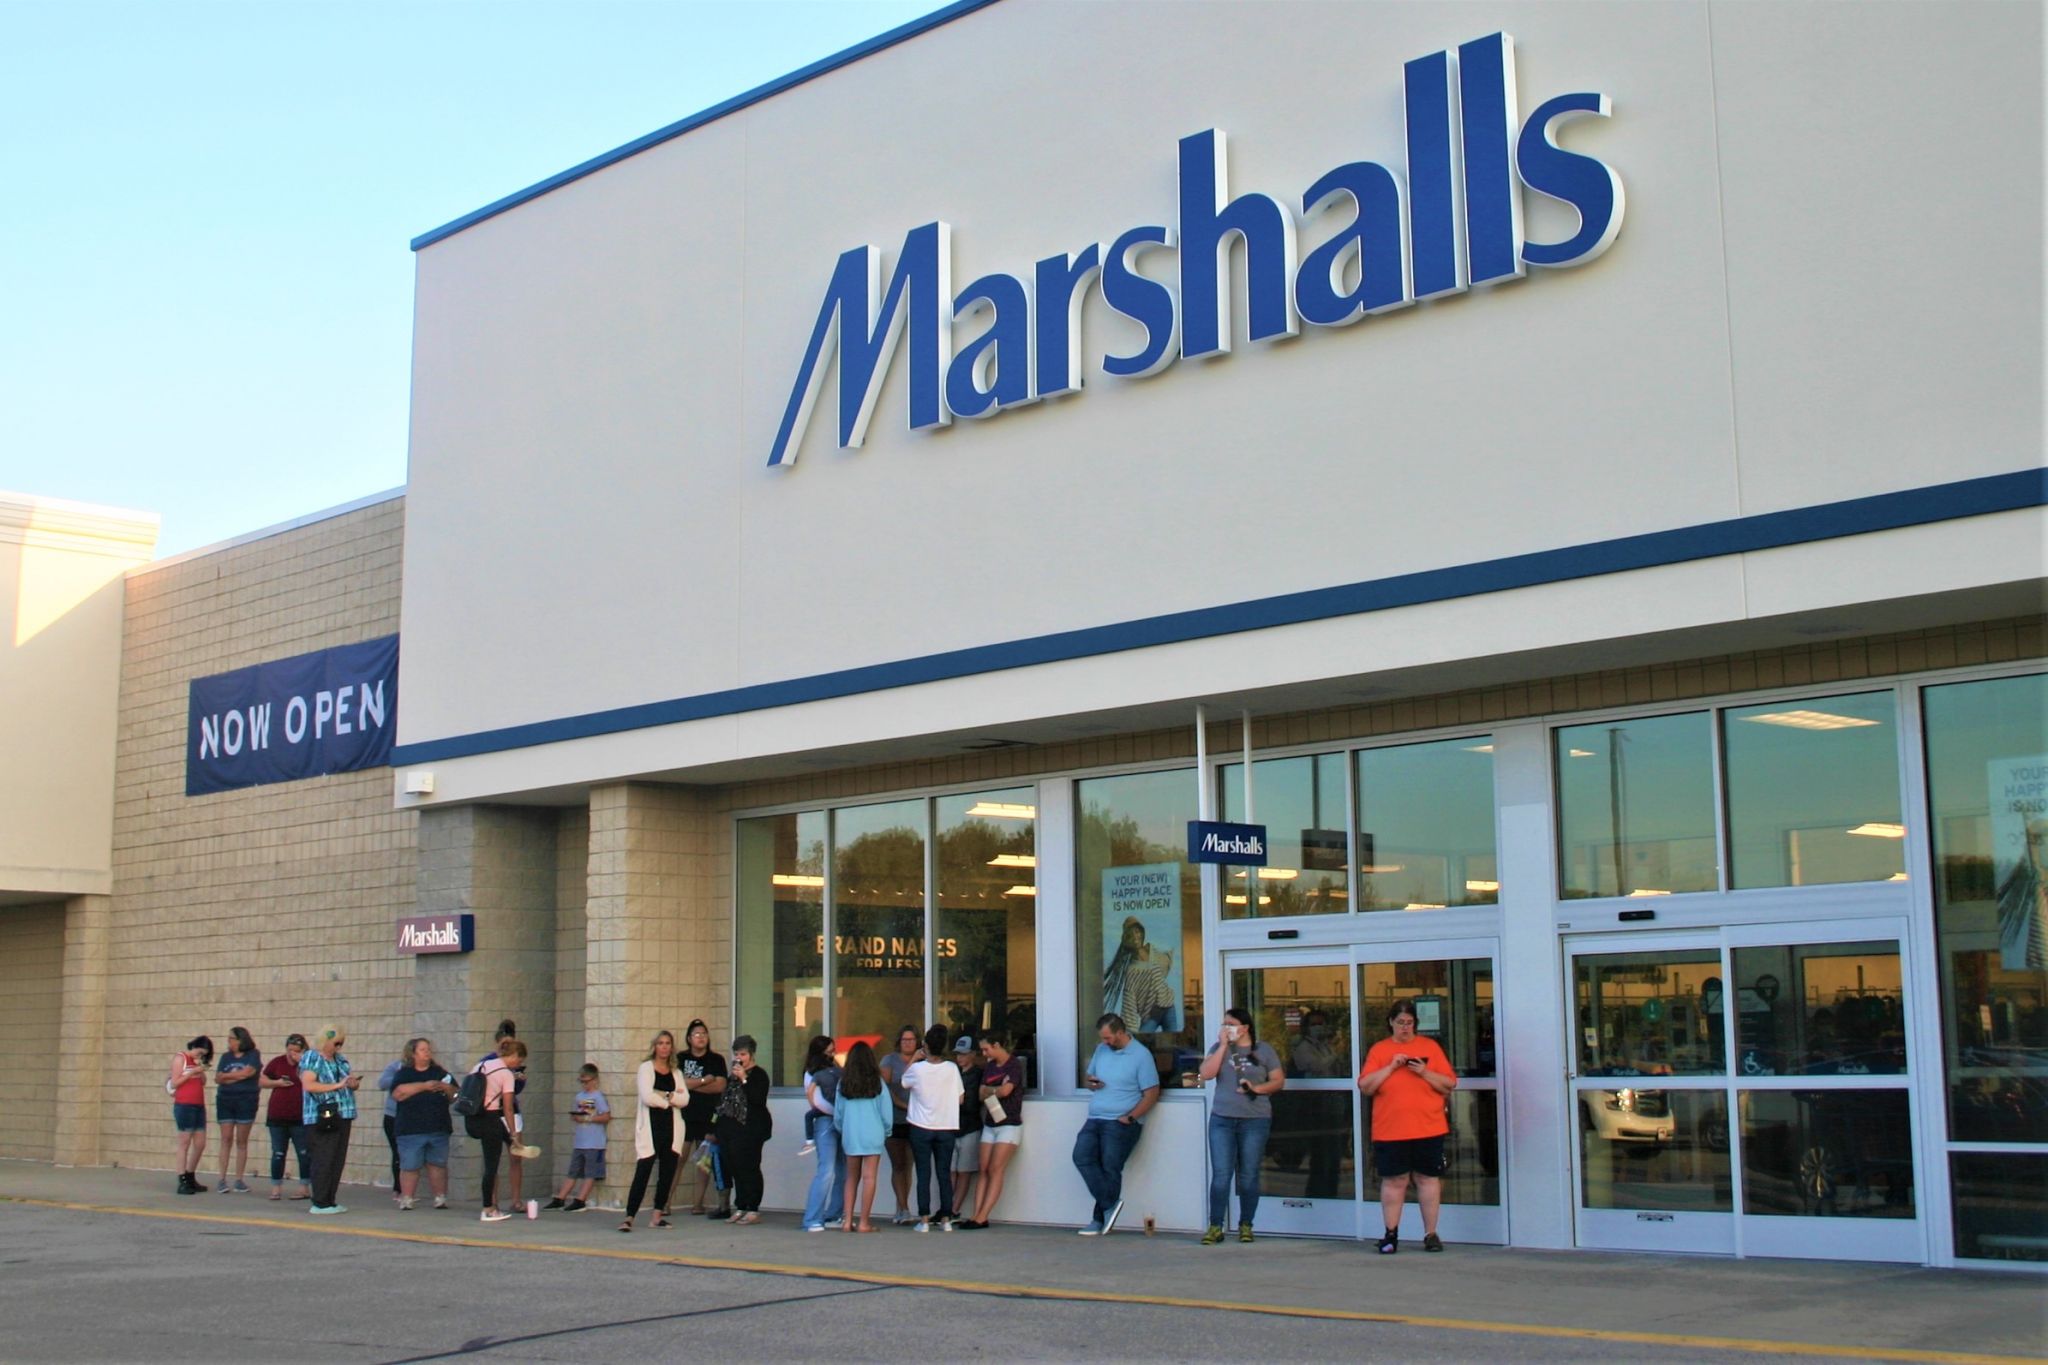 Marshalls opens in Big Rapids to loud applause